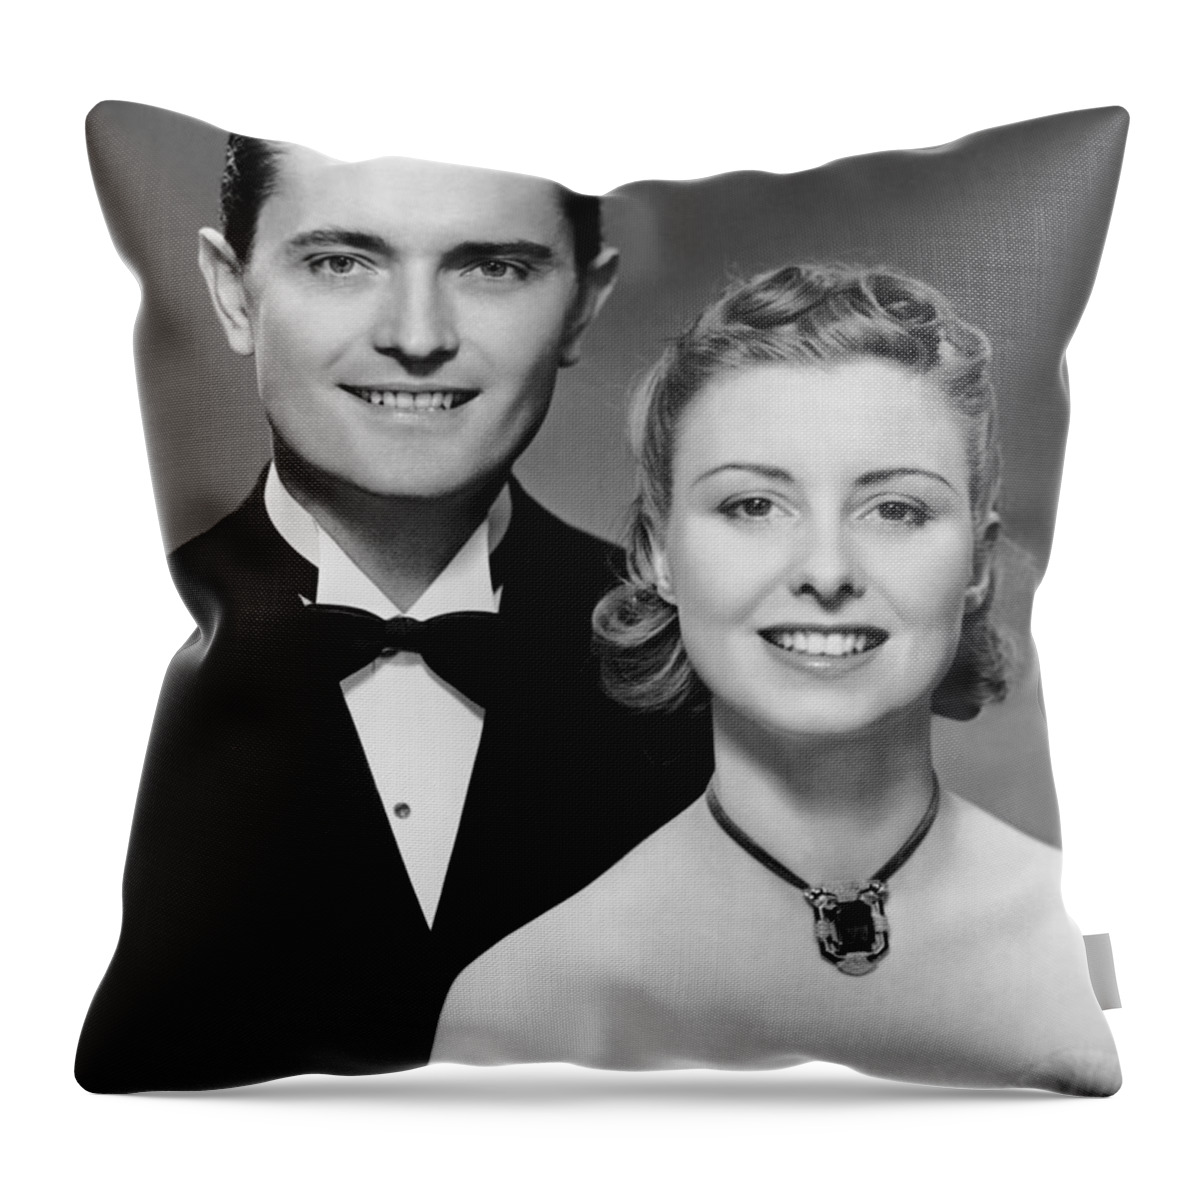 Heterosexual Couple Throw Pillow featuring the photograph Portrait Of Couple In Formal Wear by George Marks